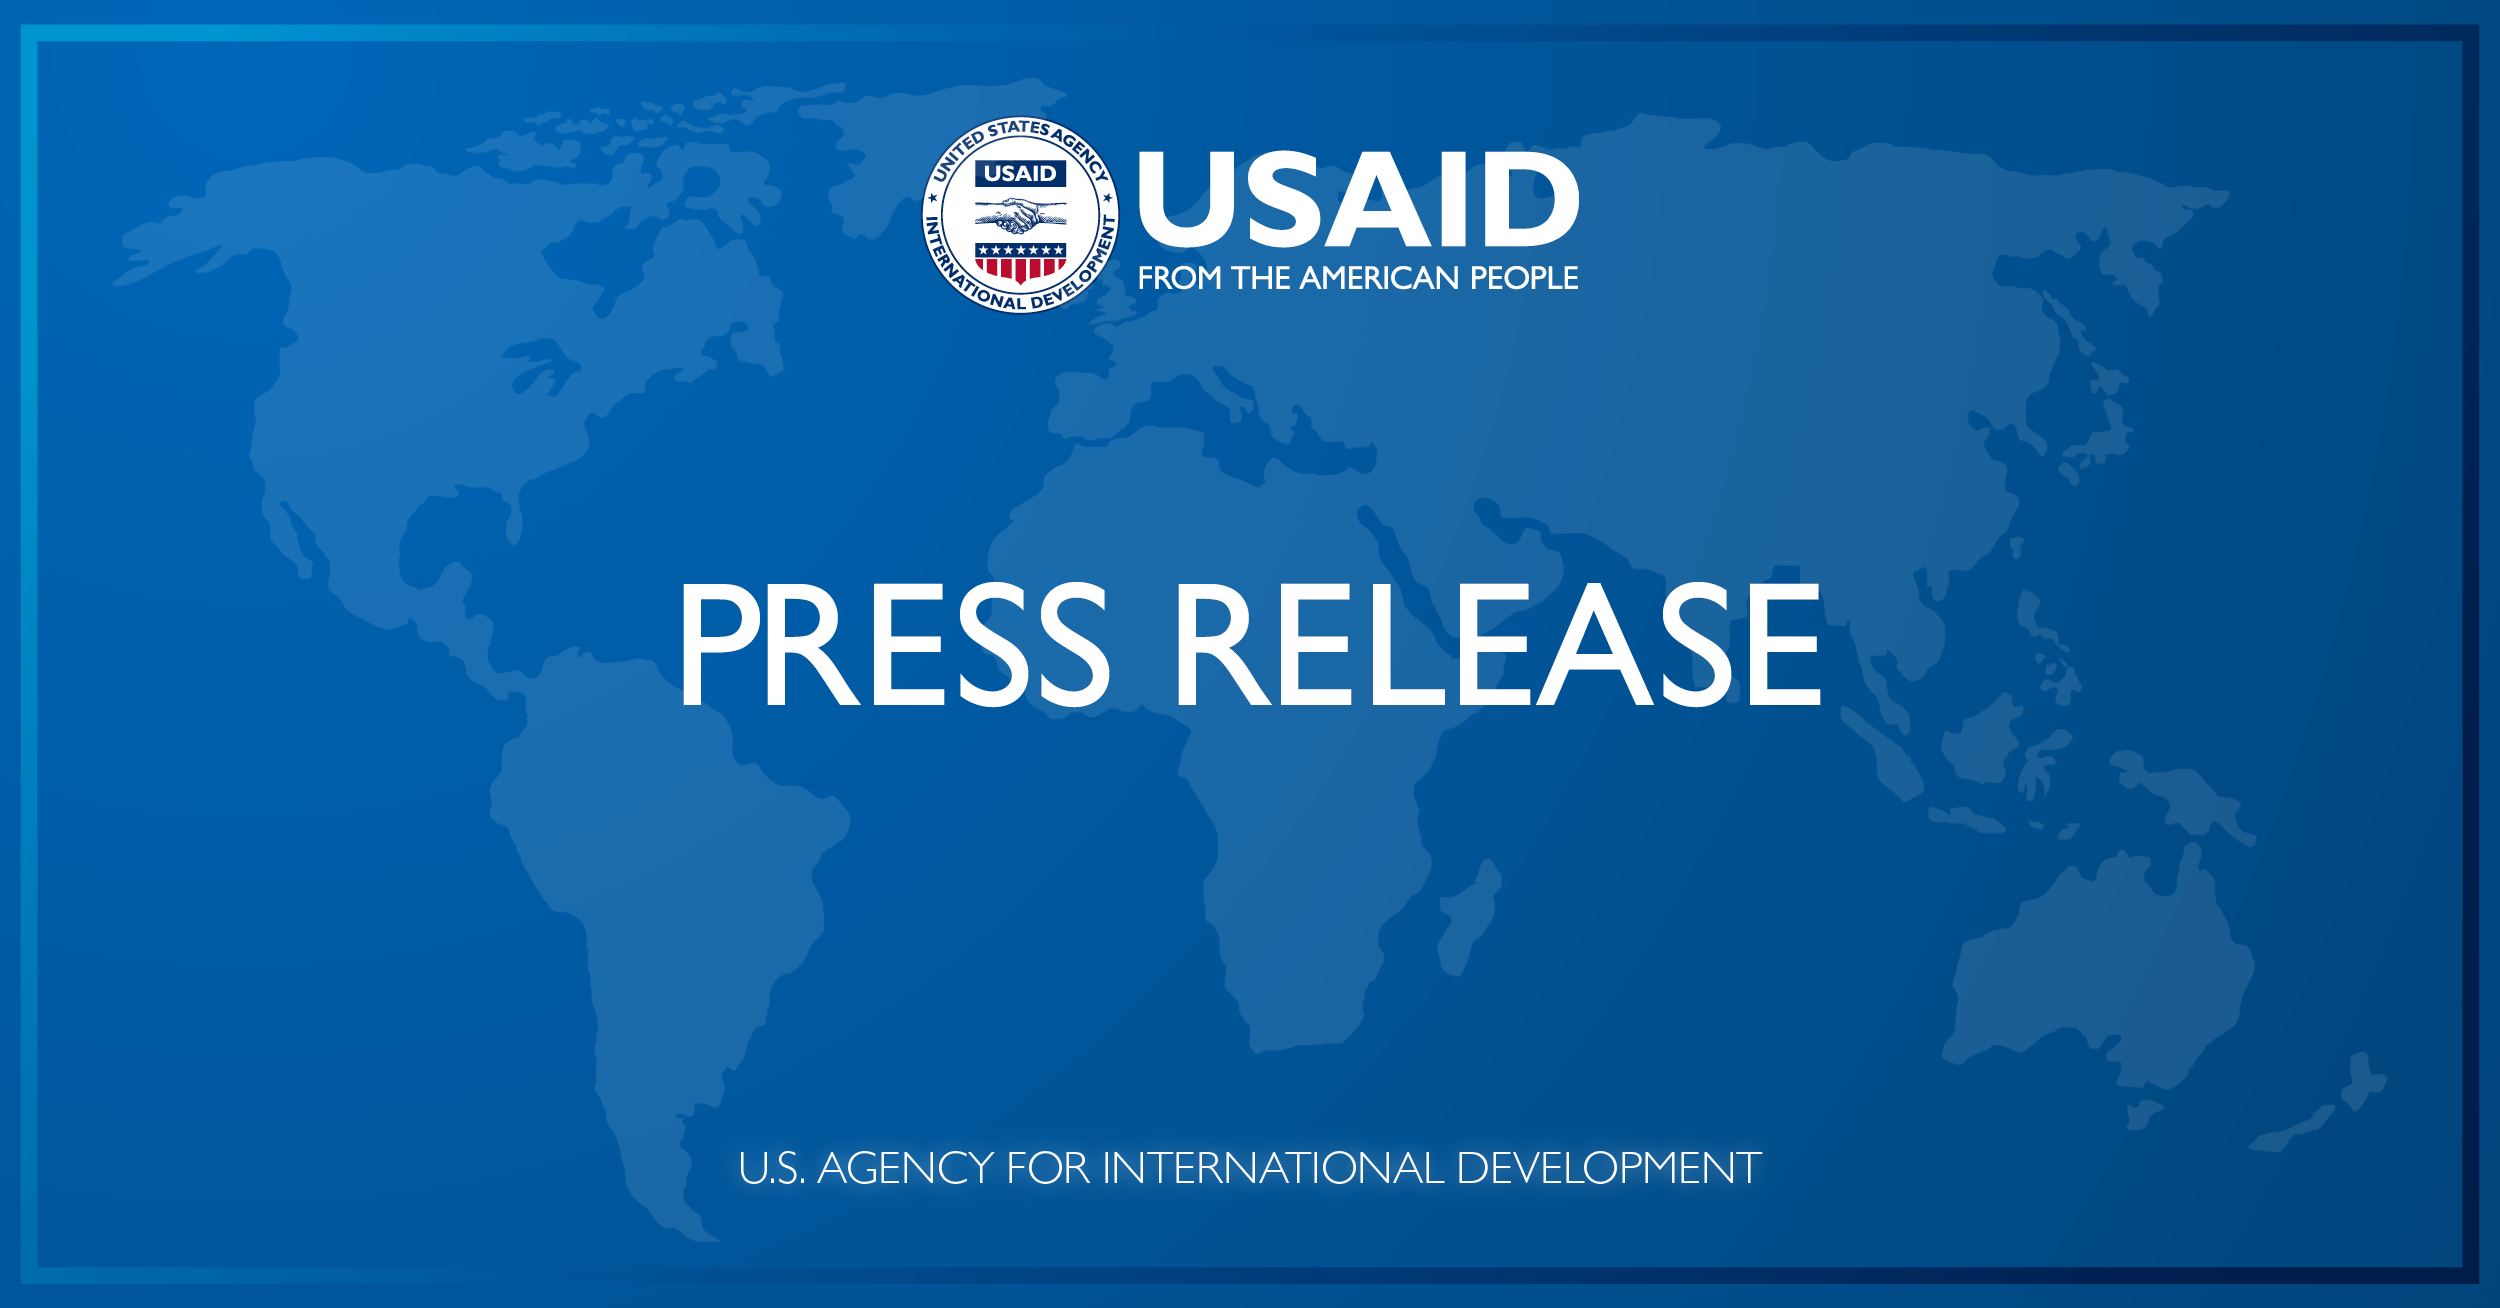 The United States has announced a commitment of 30 million dollars to support the rights of women and girls in Afghanistan Press release | US Agency for International Development